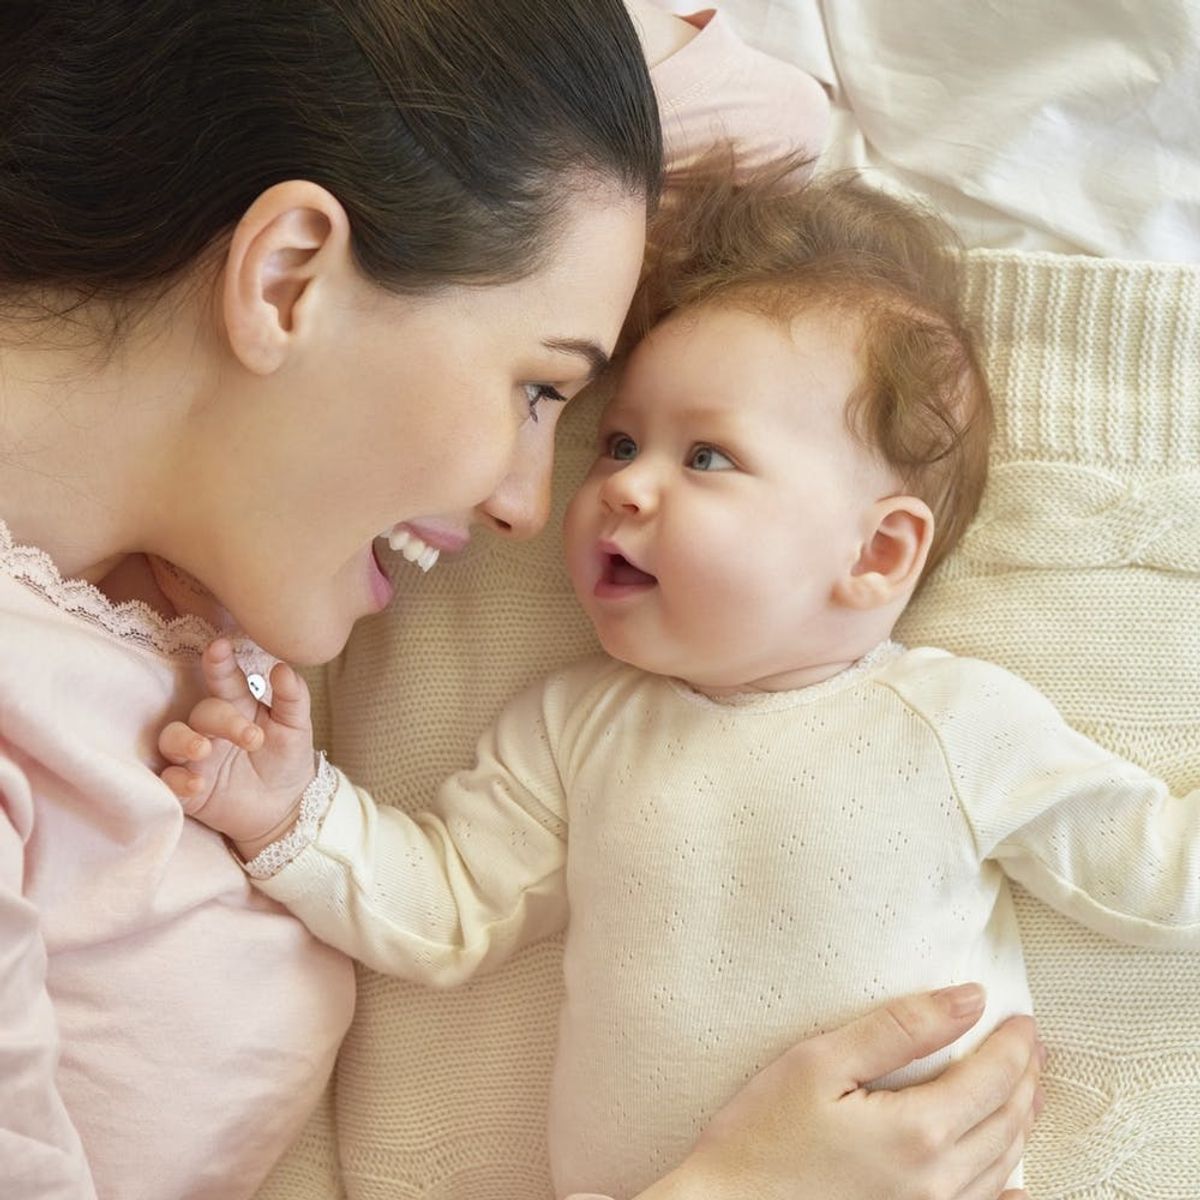 7 Things You Should Never Say to a New Mom